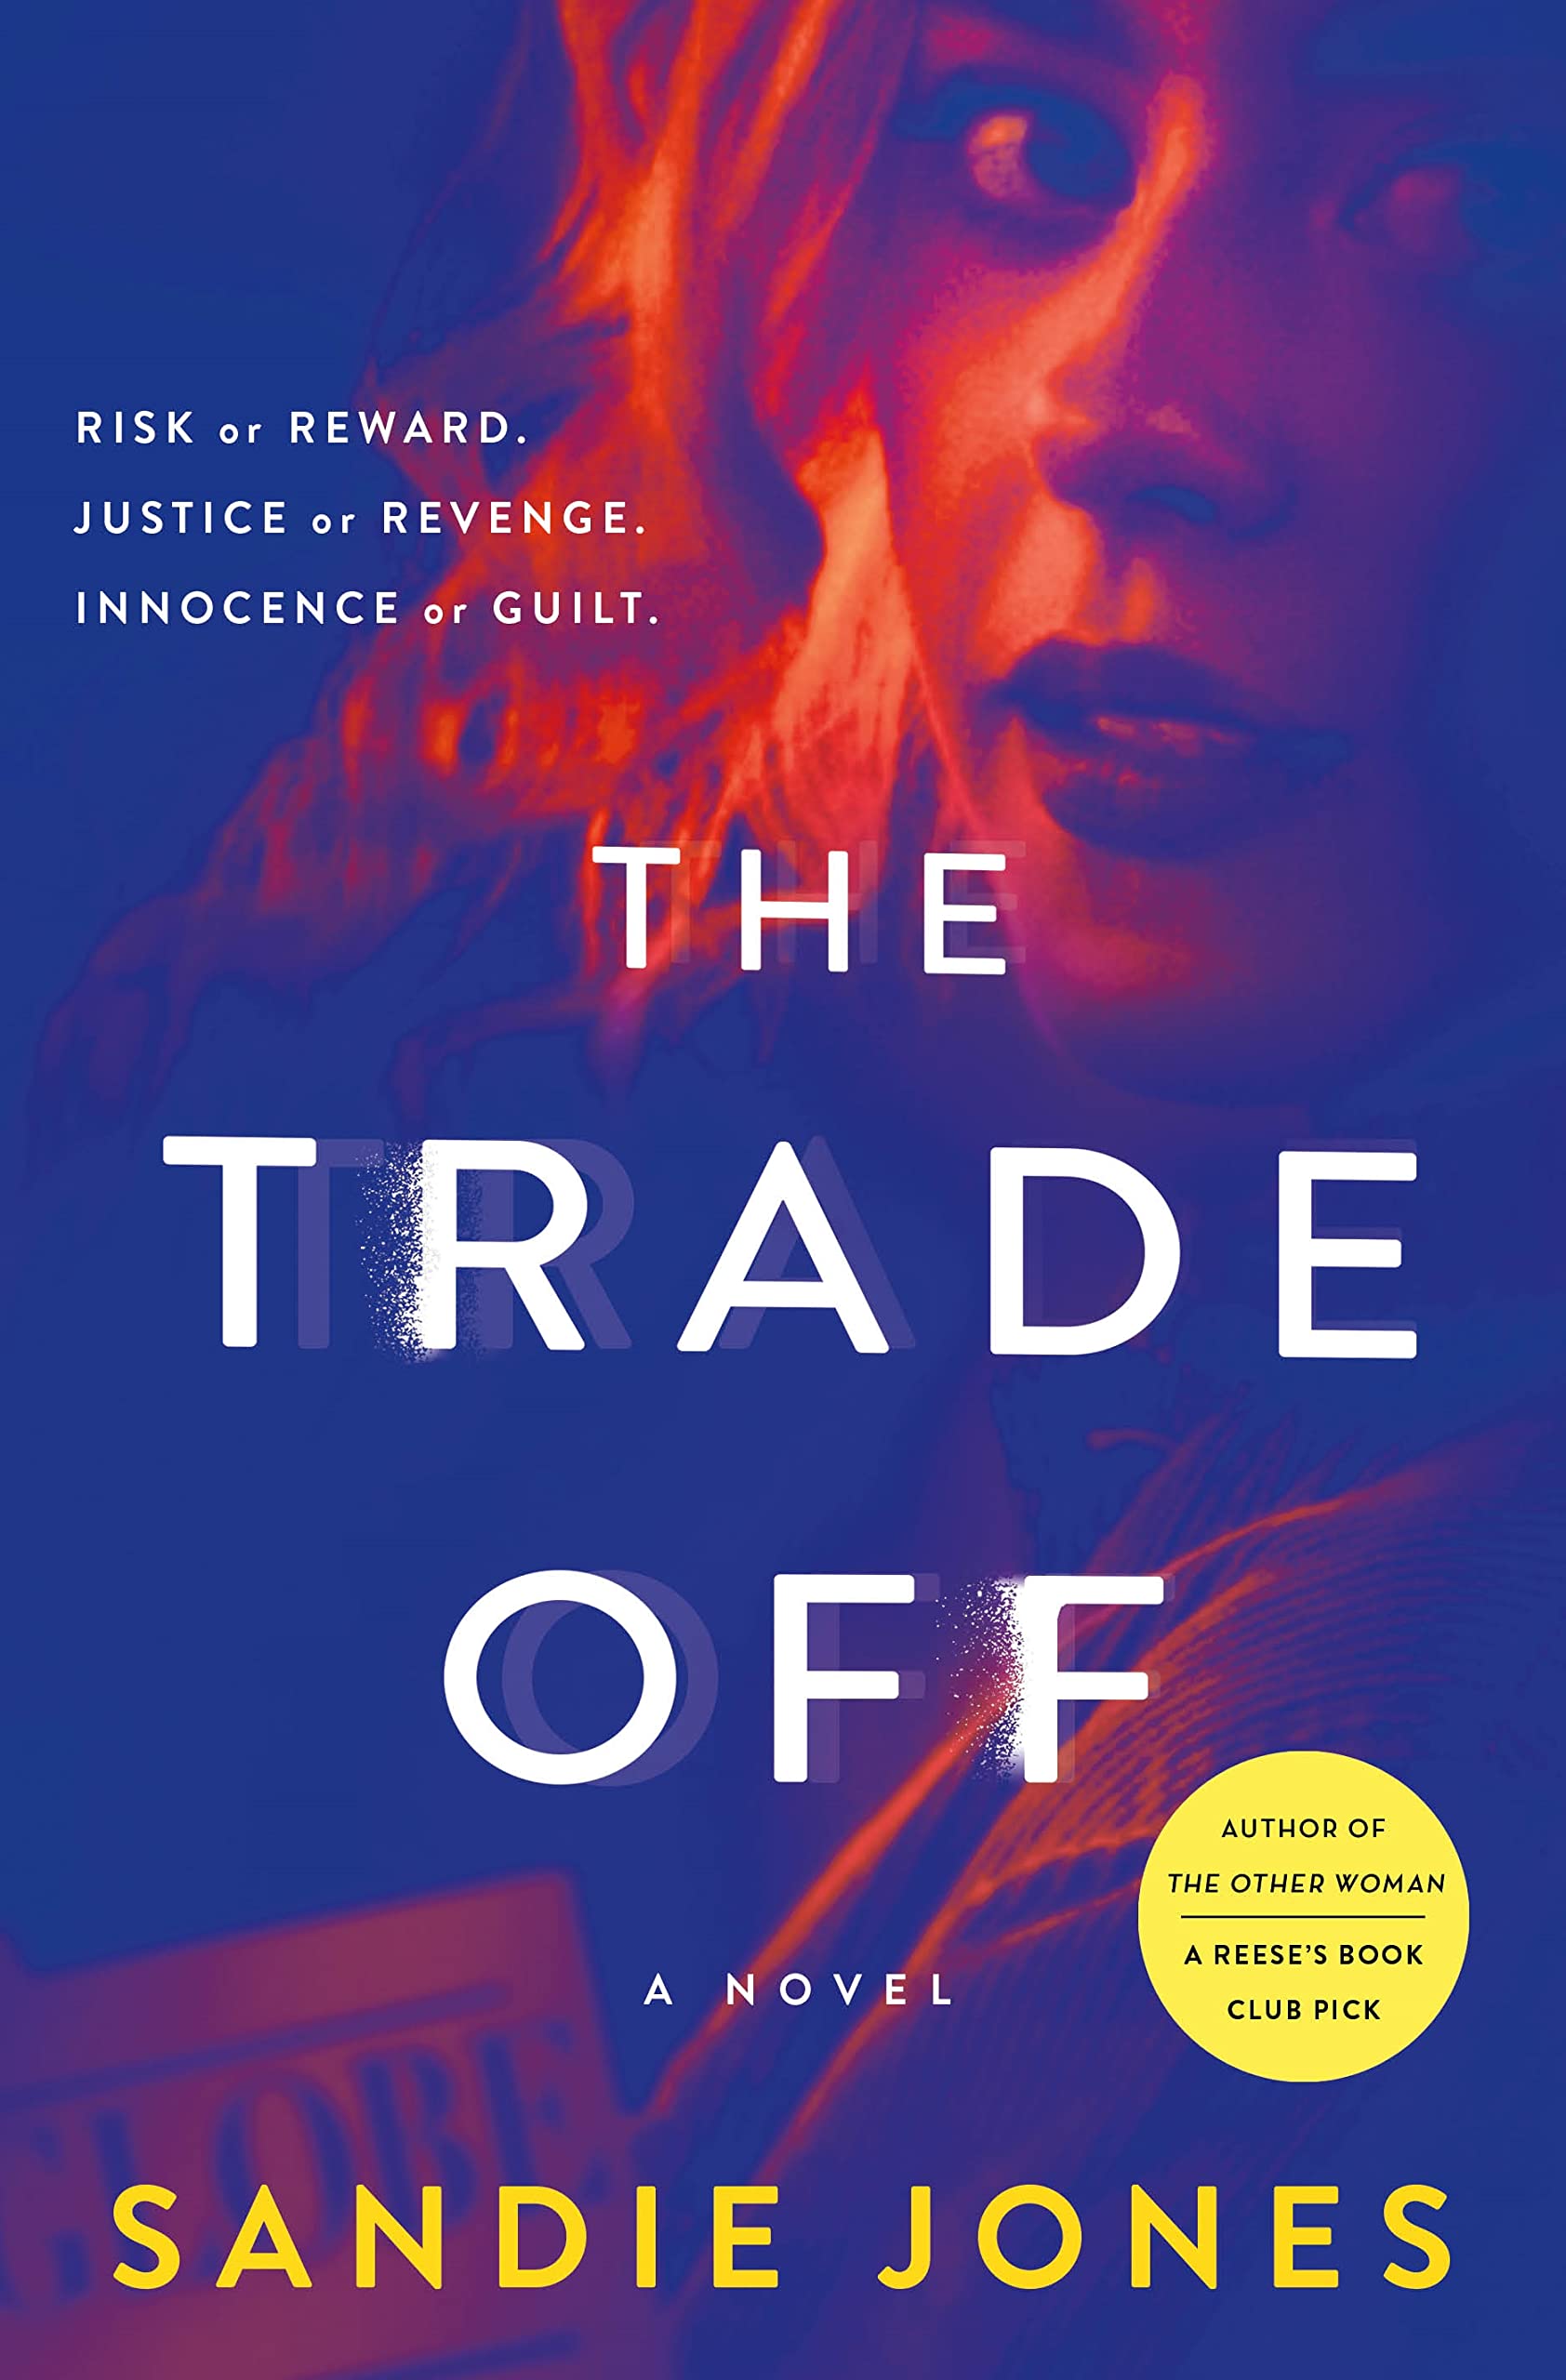  Image for "The Trade Off"